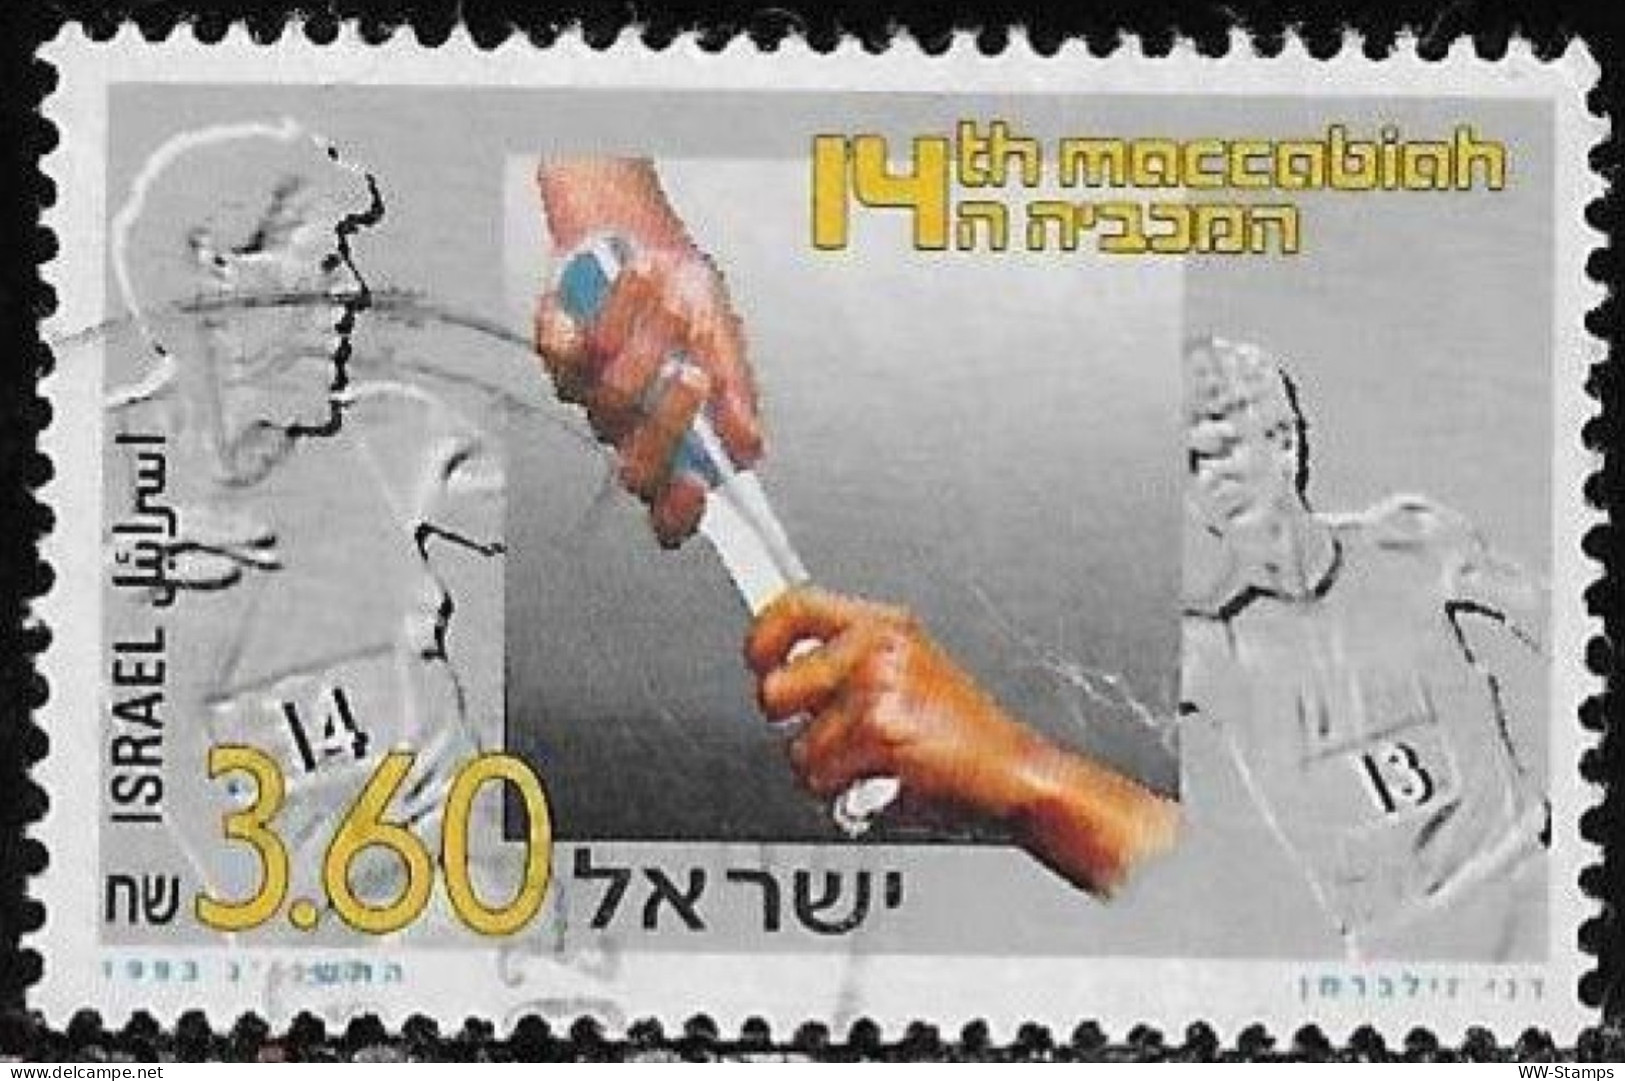 Israel 1993 Used Stamp The 14th Maccabiah Sports Games [INLT10] - Usados (sin Tab)